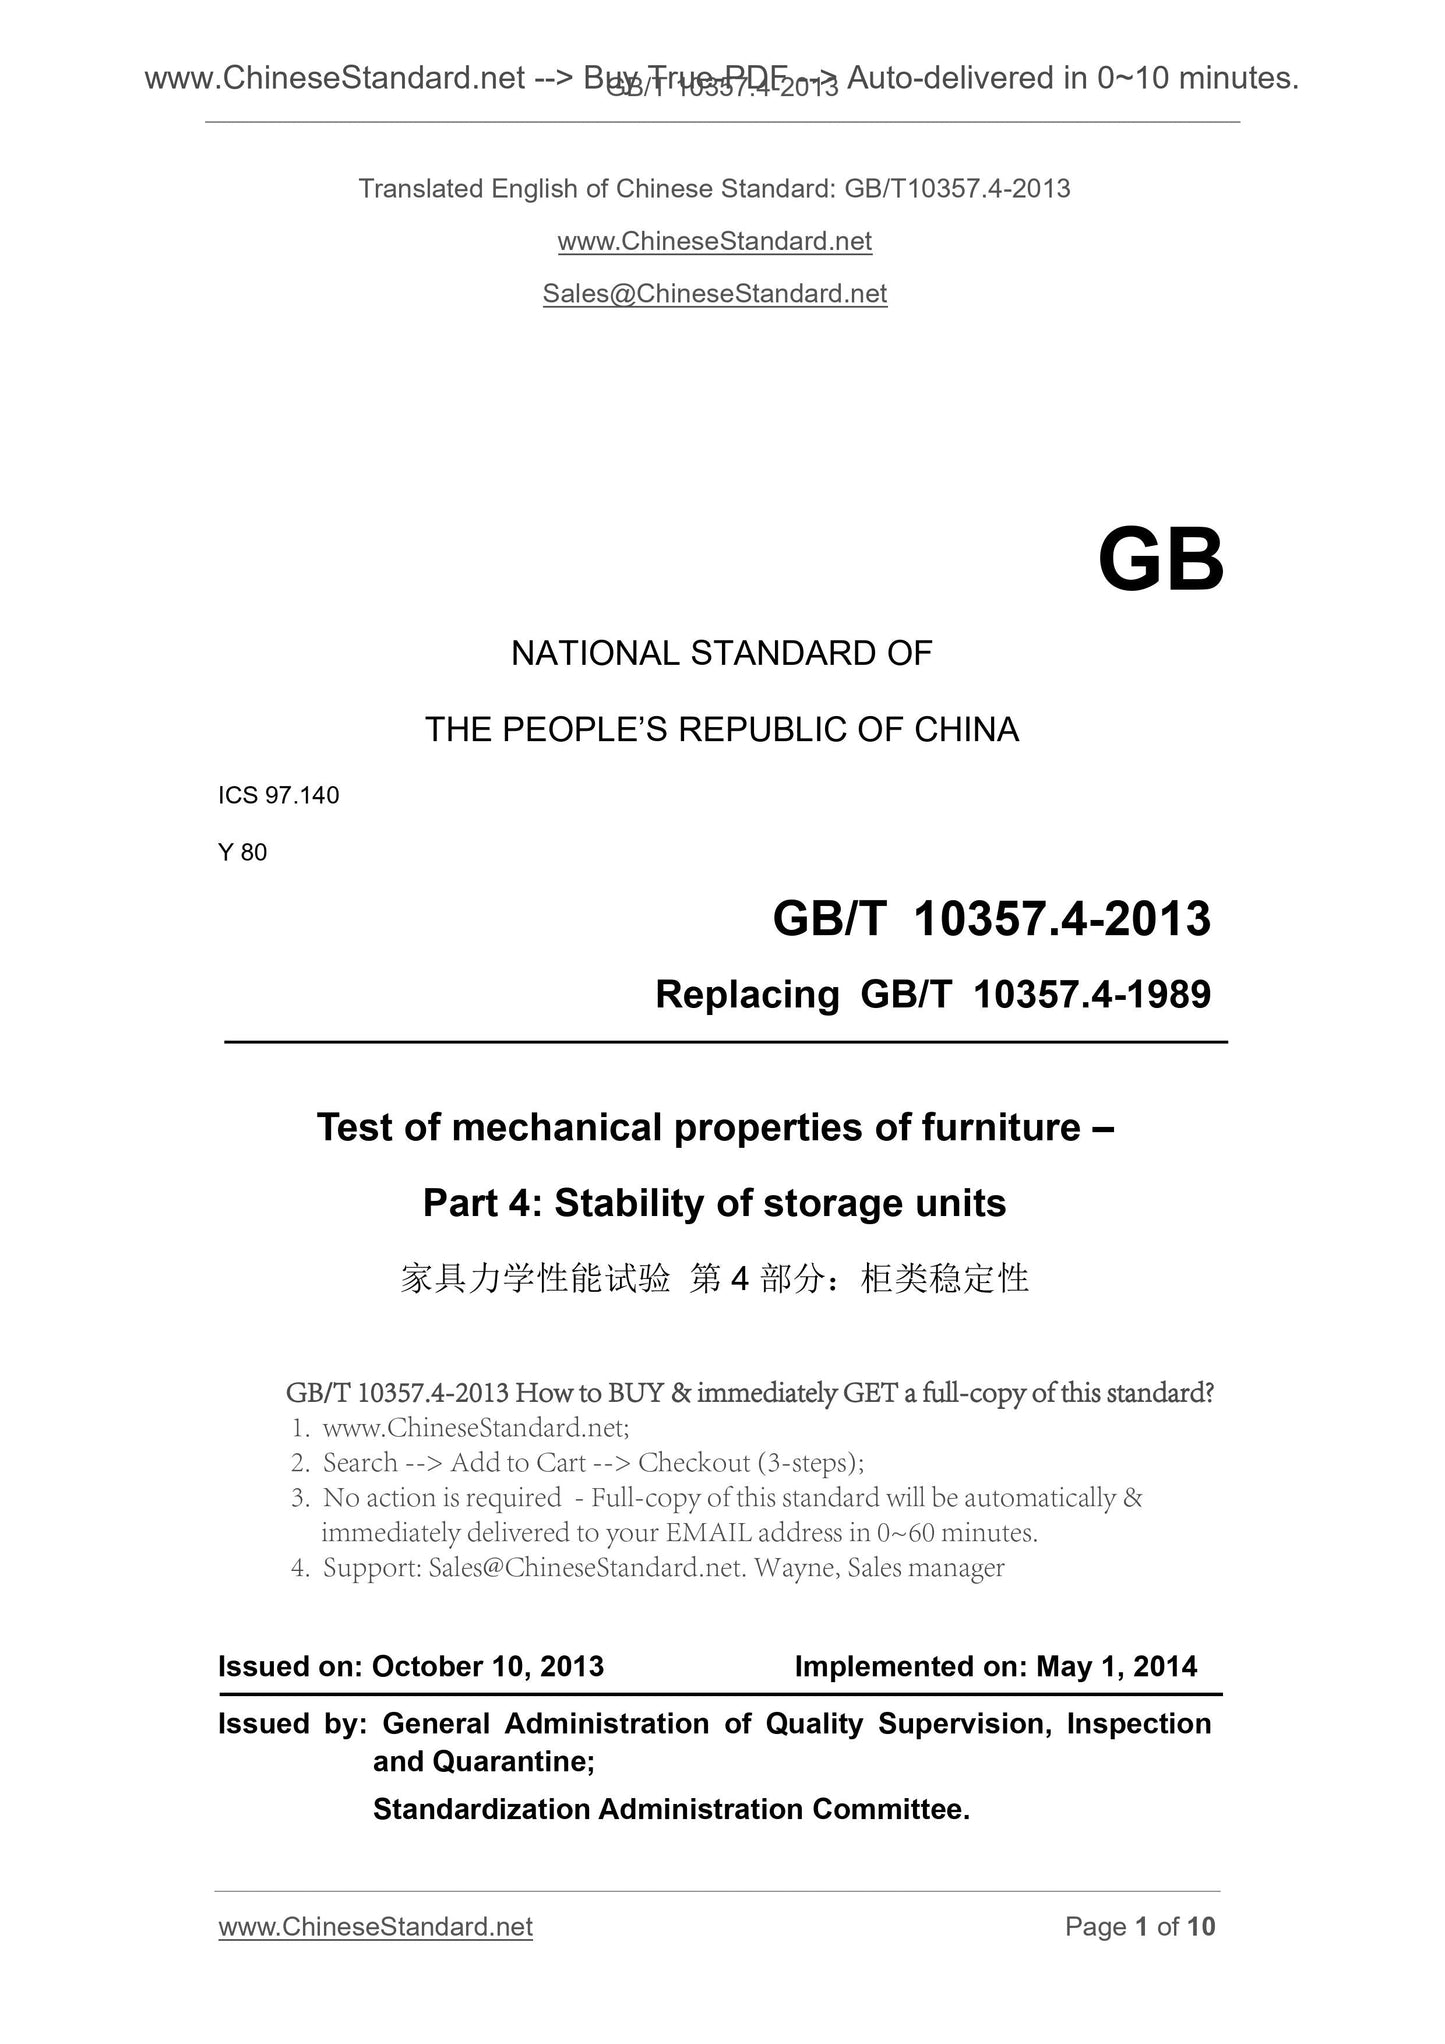 GB/T 10357.4-2013 Page 1